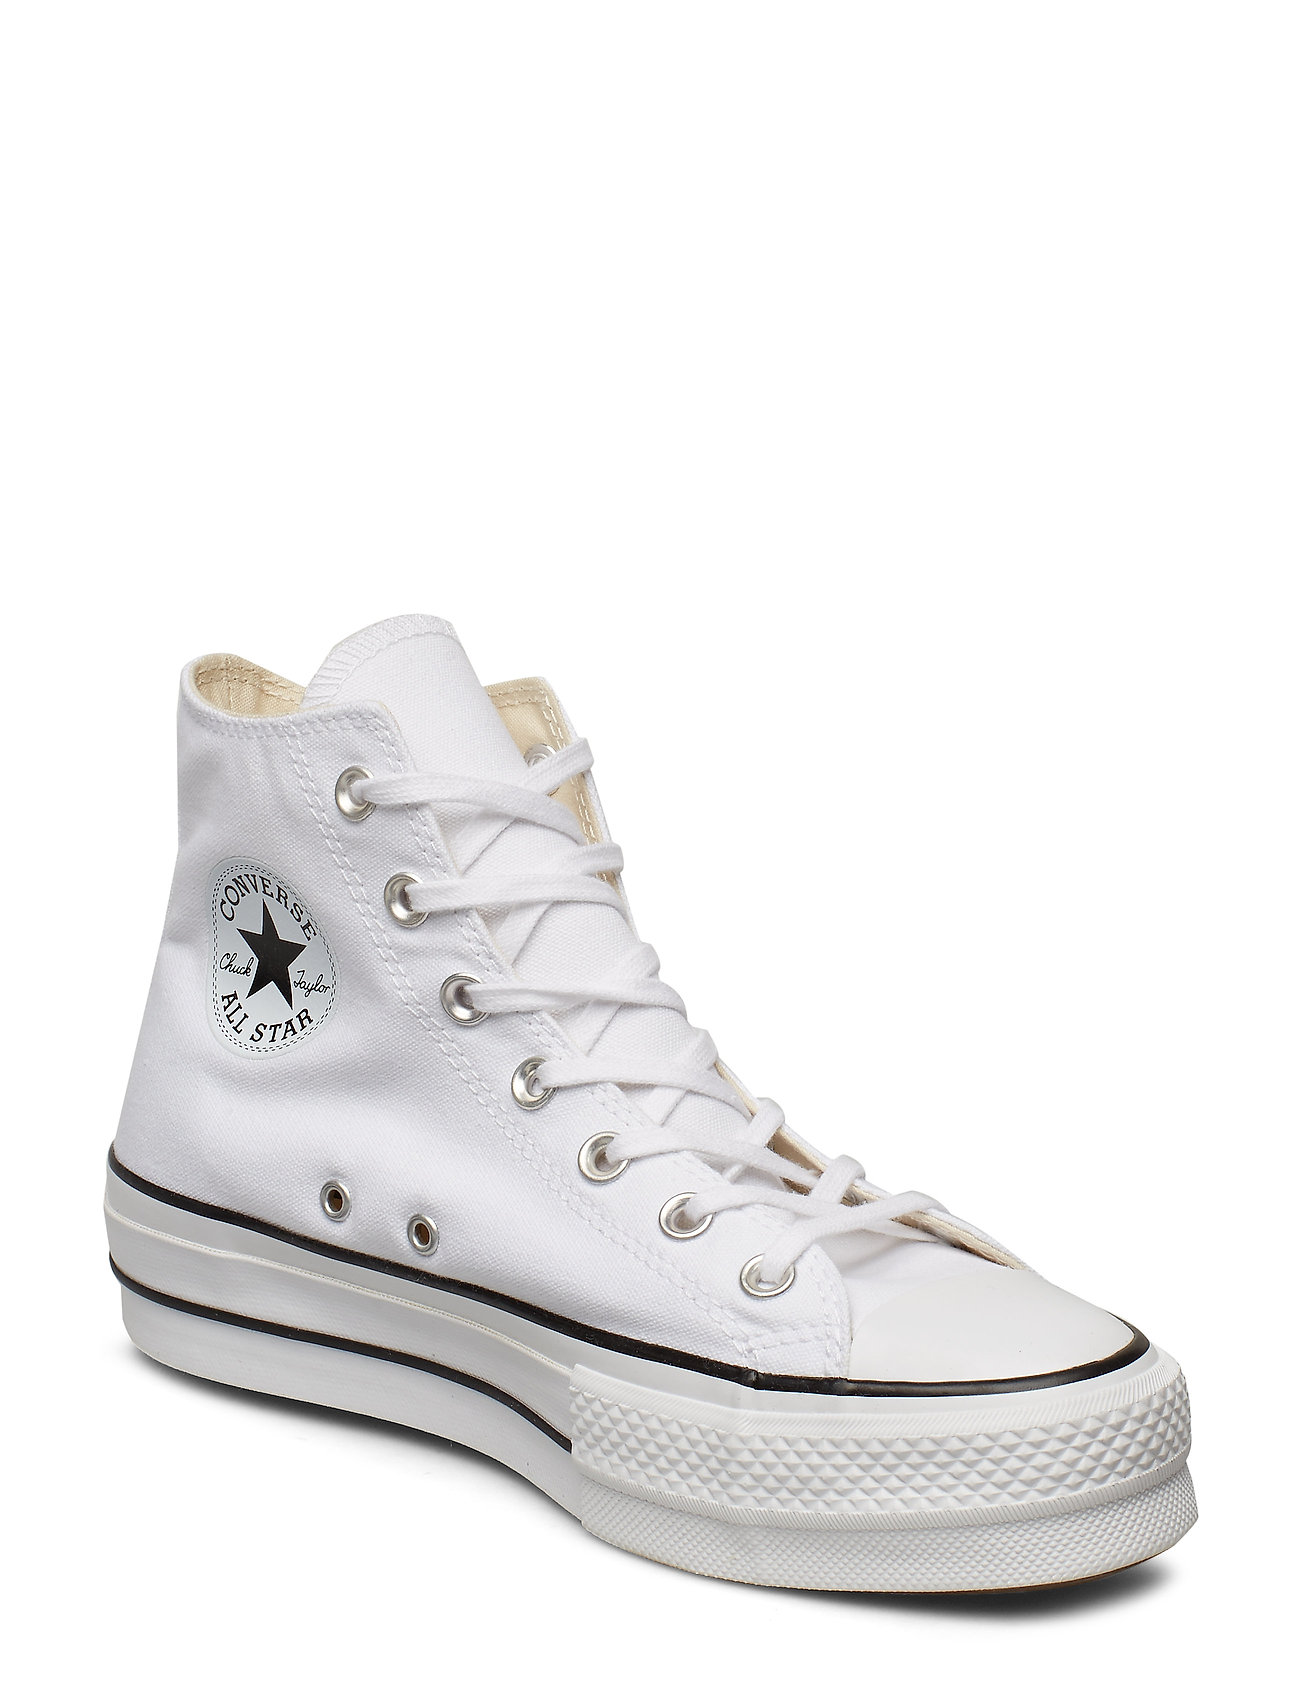 Harde wind roterend katje Converse Chuck Taylor All Star Lift - Hoge sneakers | Boozt.com